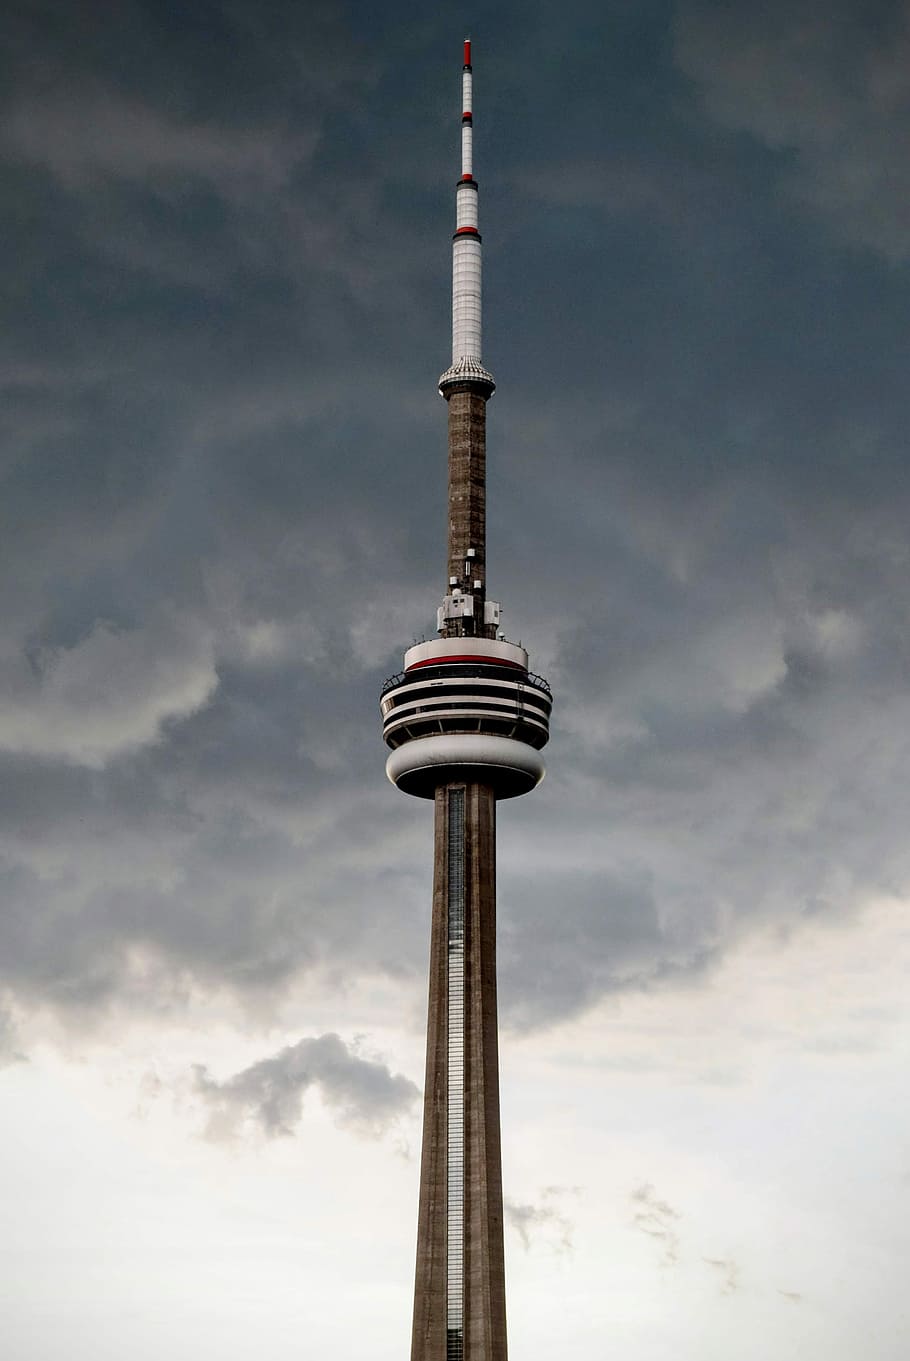 brown and white metal tower under cloudy sky, CN Tower, Toronto, Canada